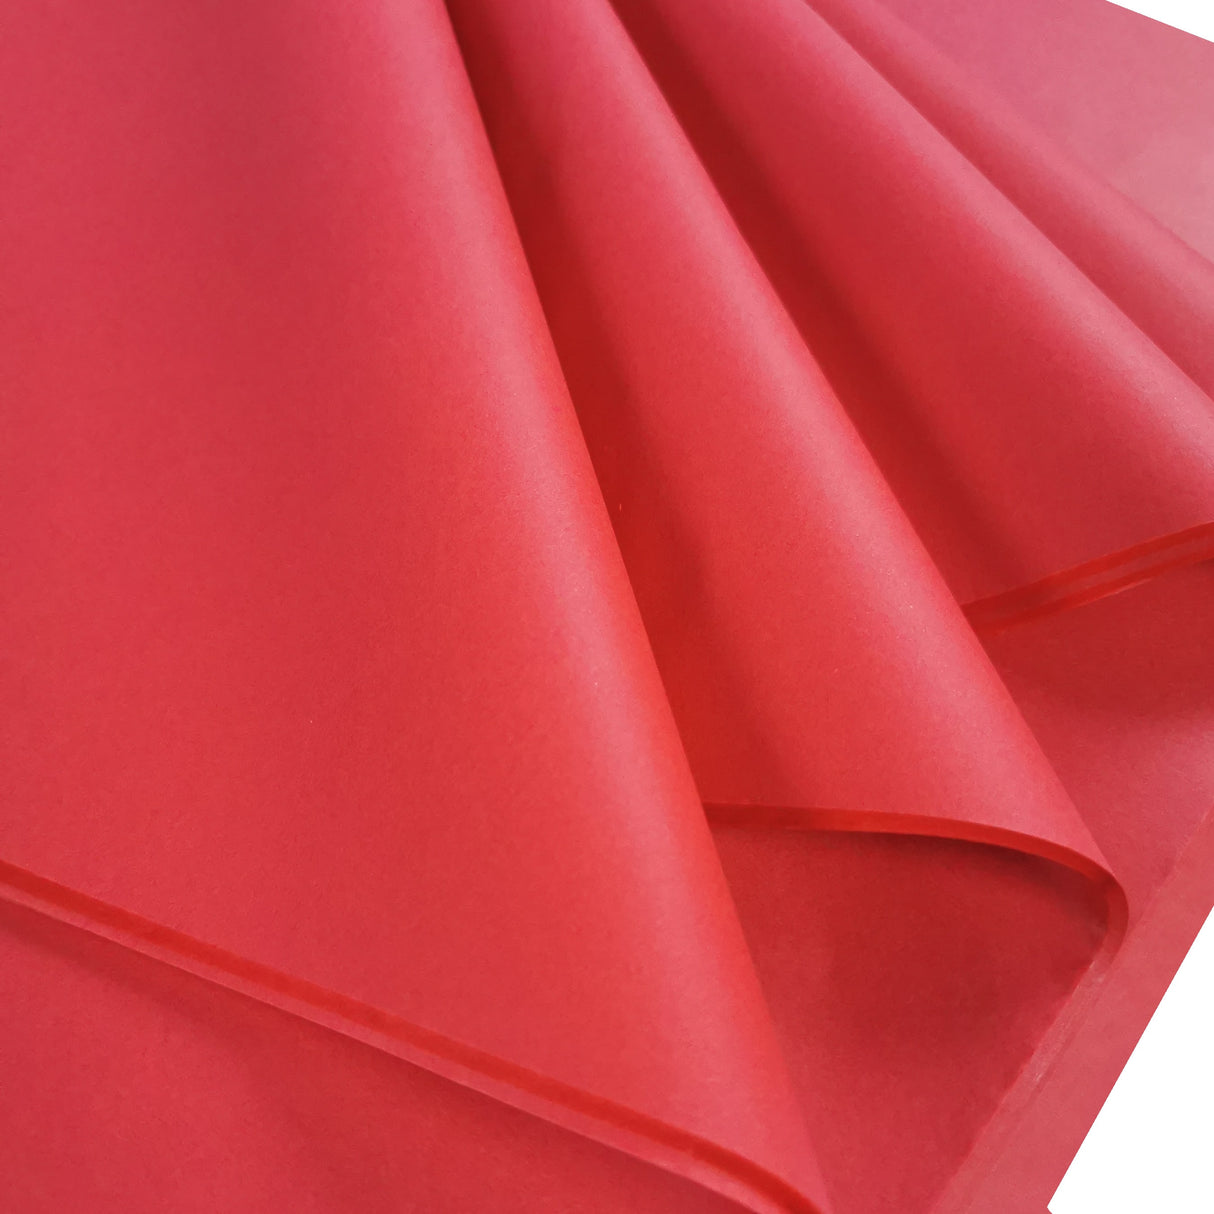 Red Tissue Paper Folds 3